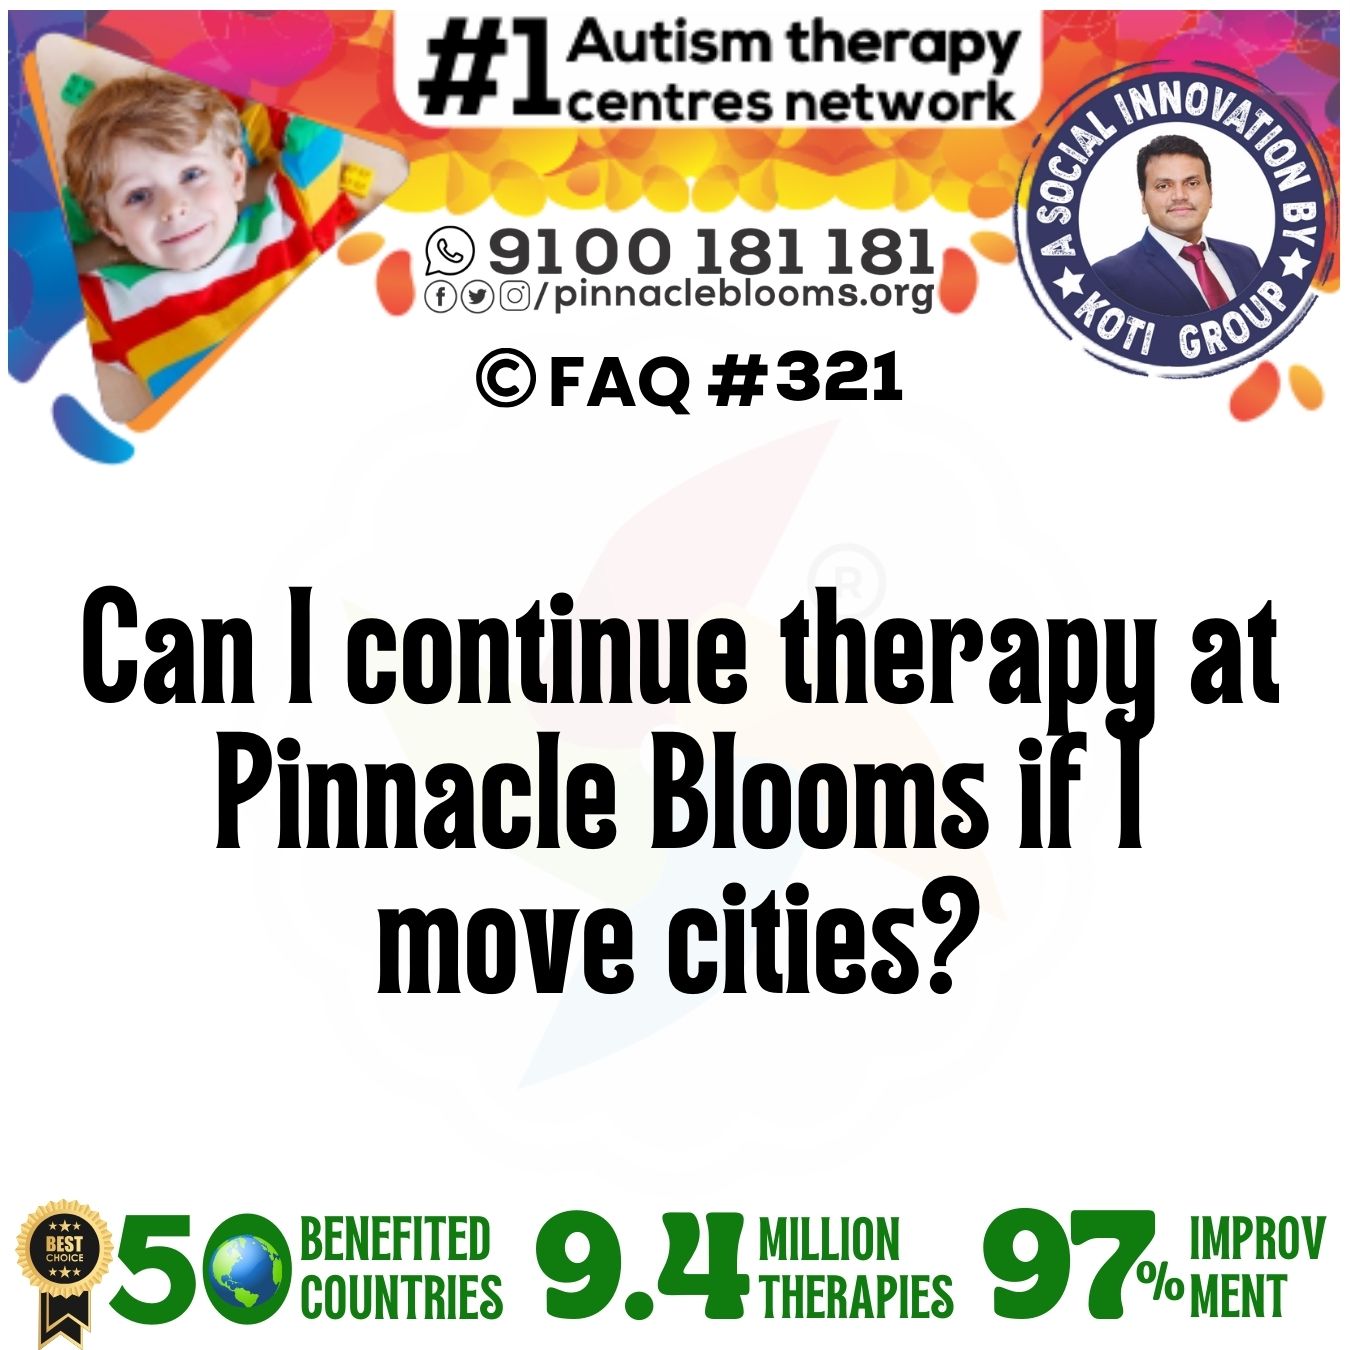 Can I continue therapy at Pinnacle Blooms if I move cities?